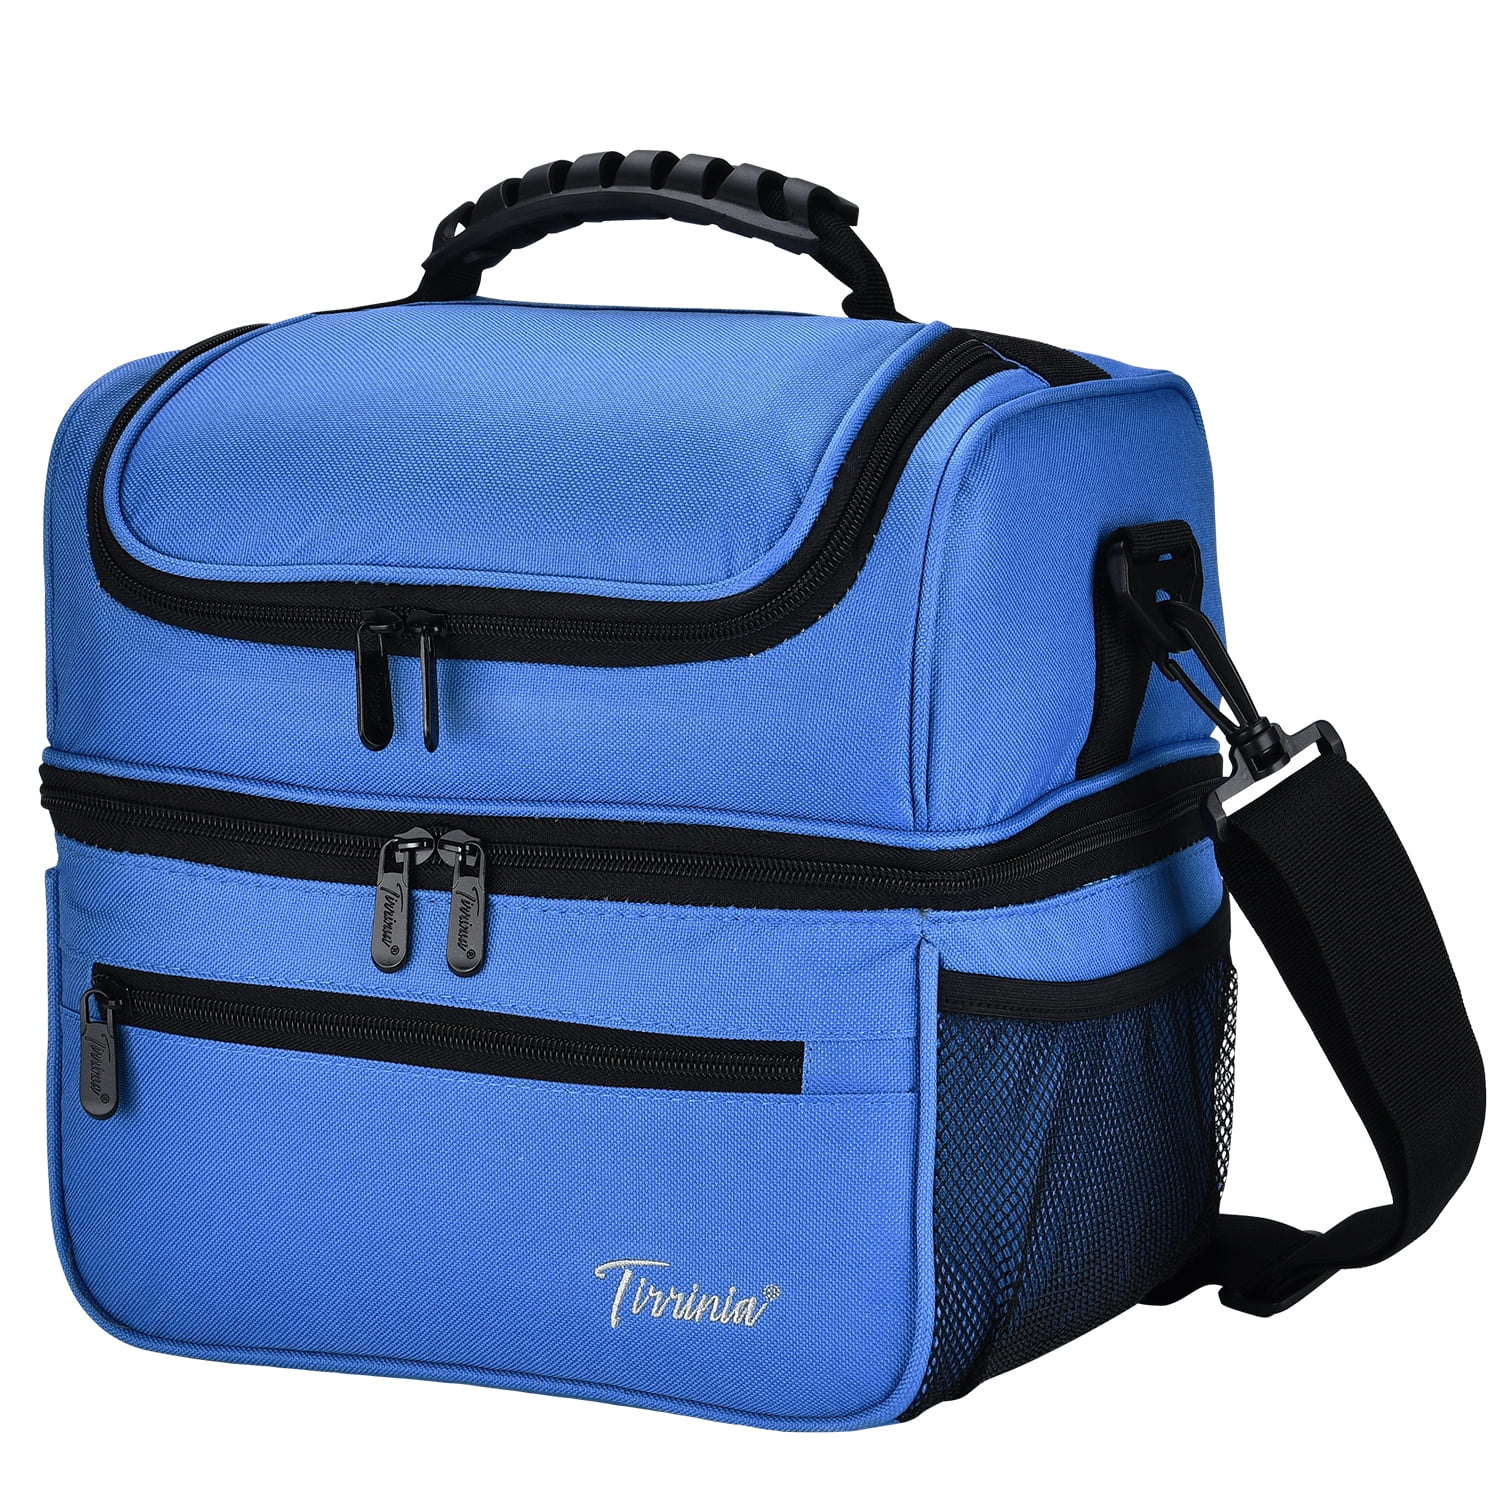 12 to 16can expandible softside insulated leakproof cooler bag lunch bag adults 